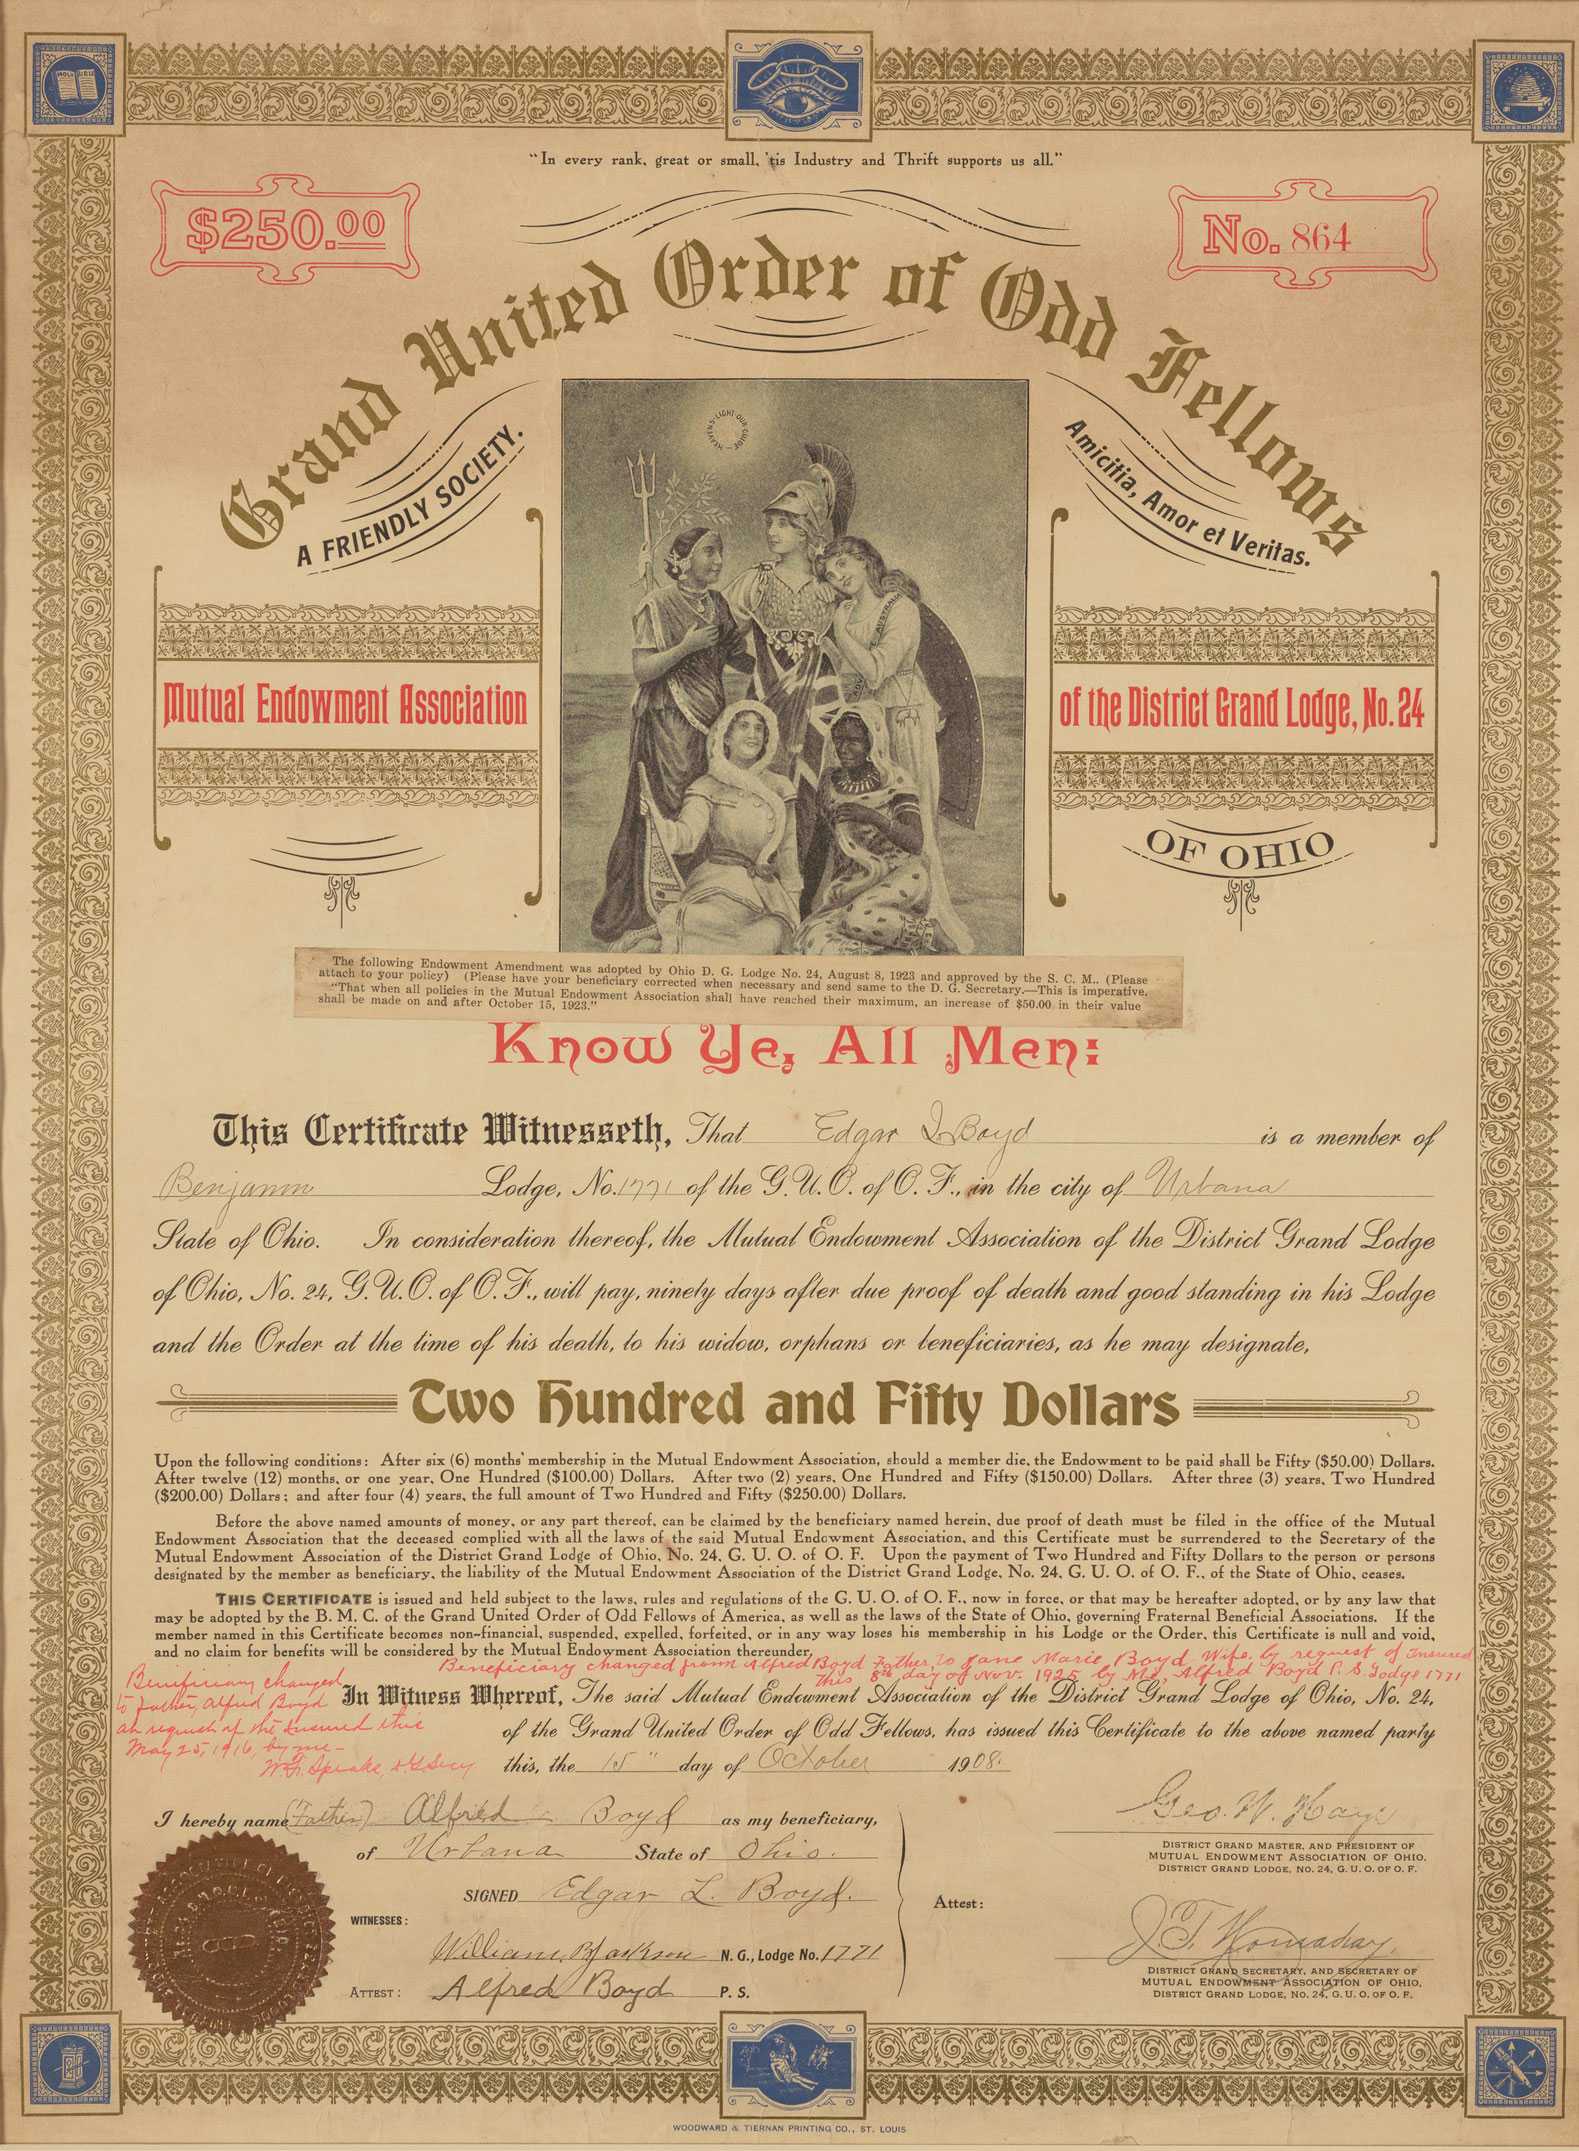 A certificate of endowment for the Grand United Order of Odd Fellows